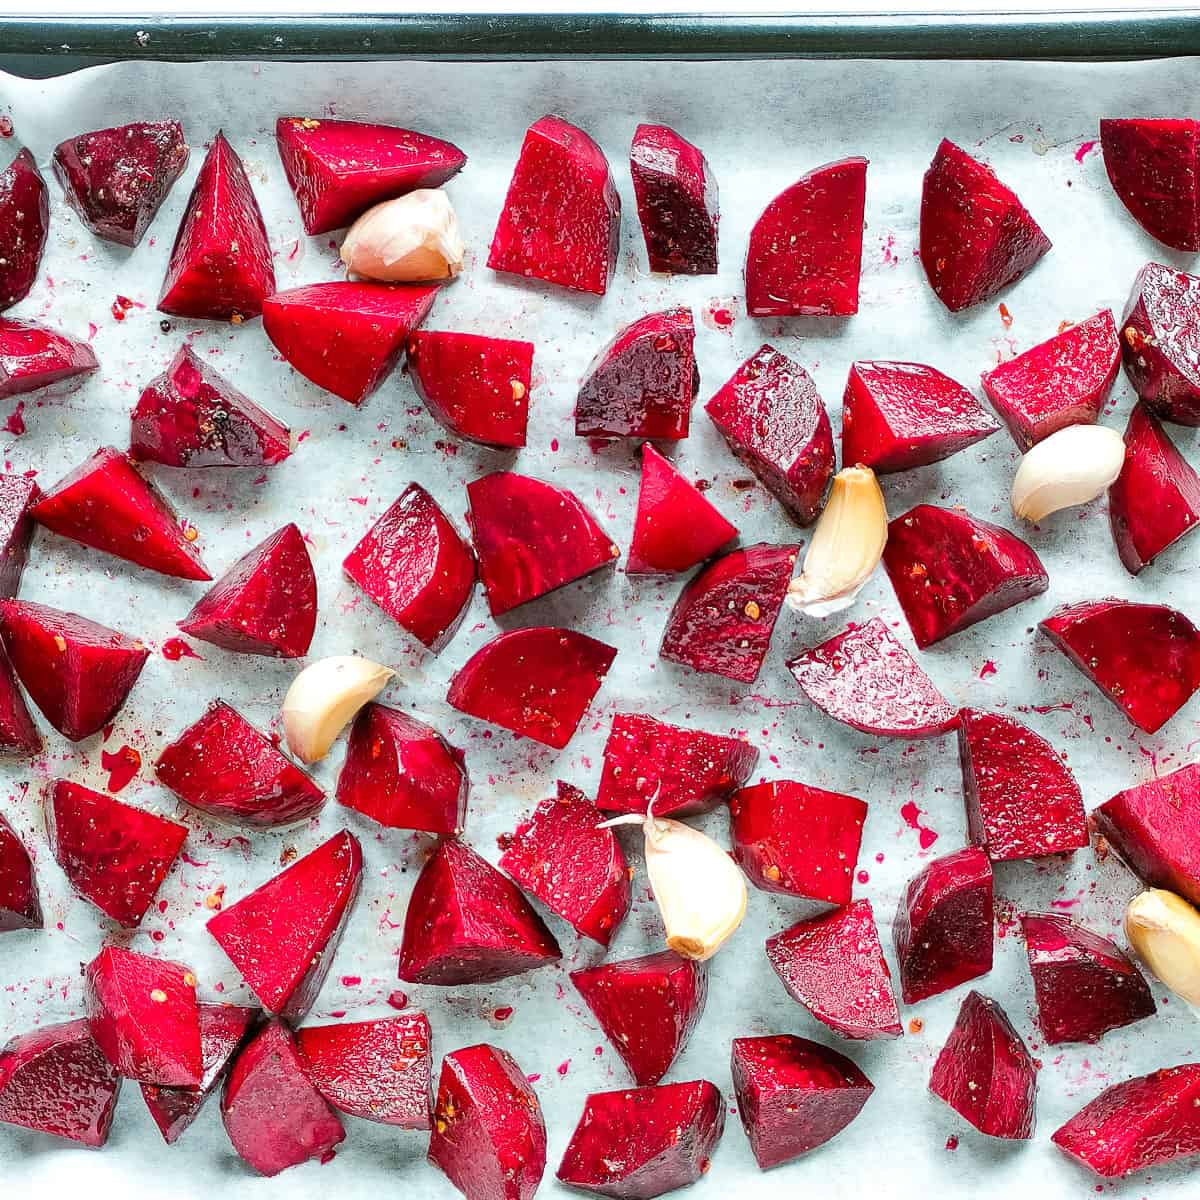 Seasoned beetroot cubes and garlic ready for roasting on a baking sheet.